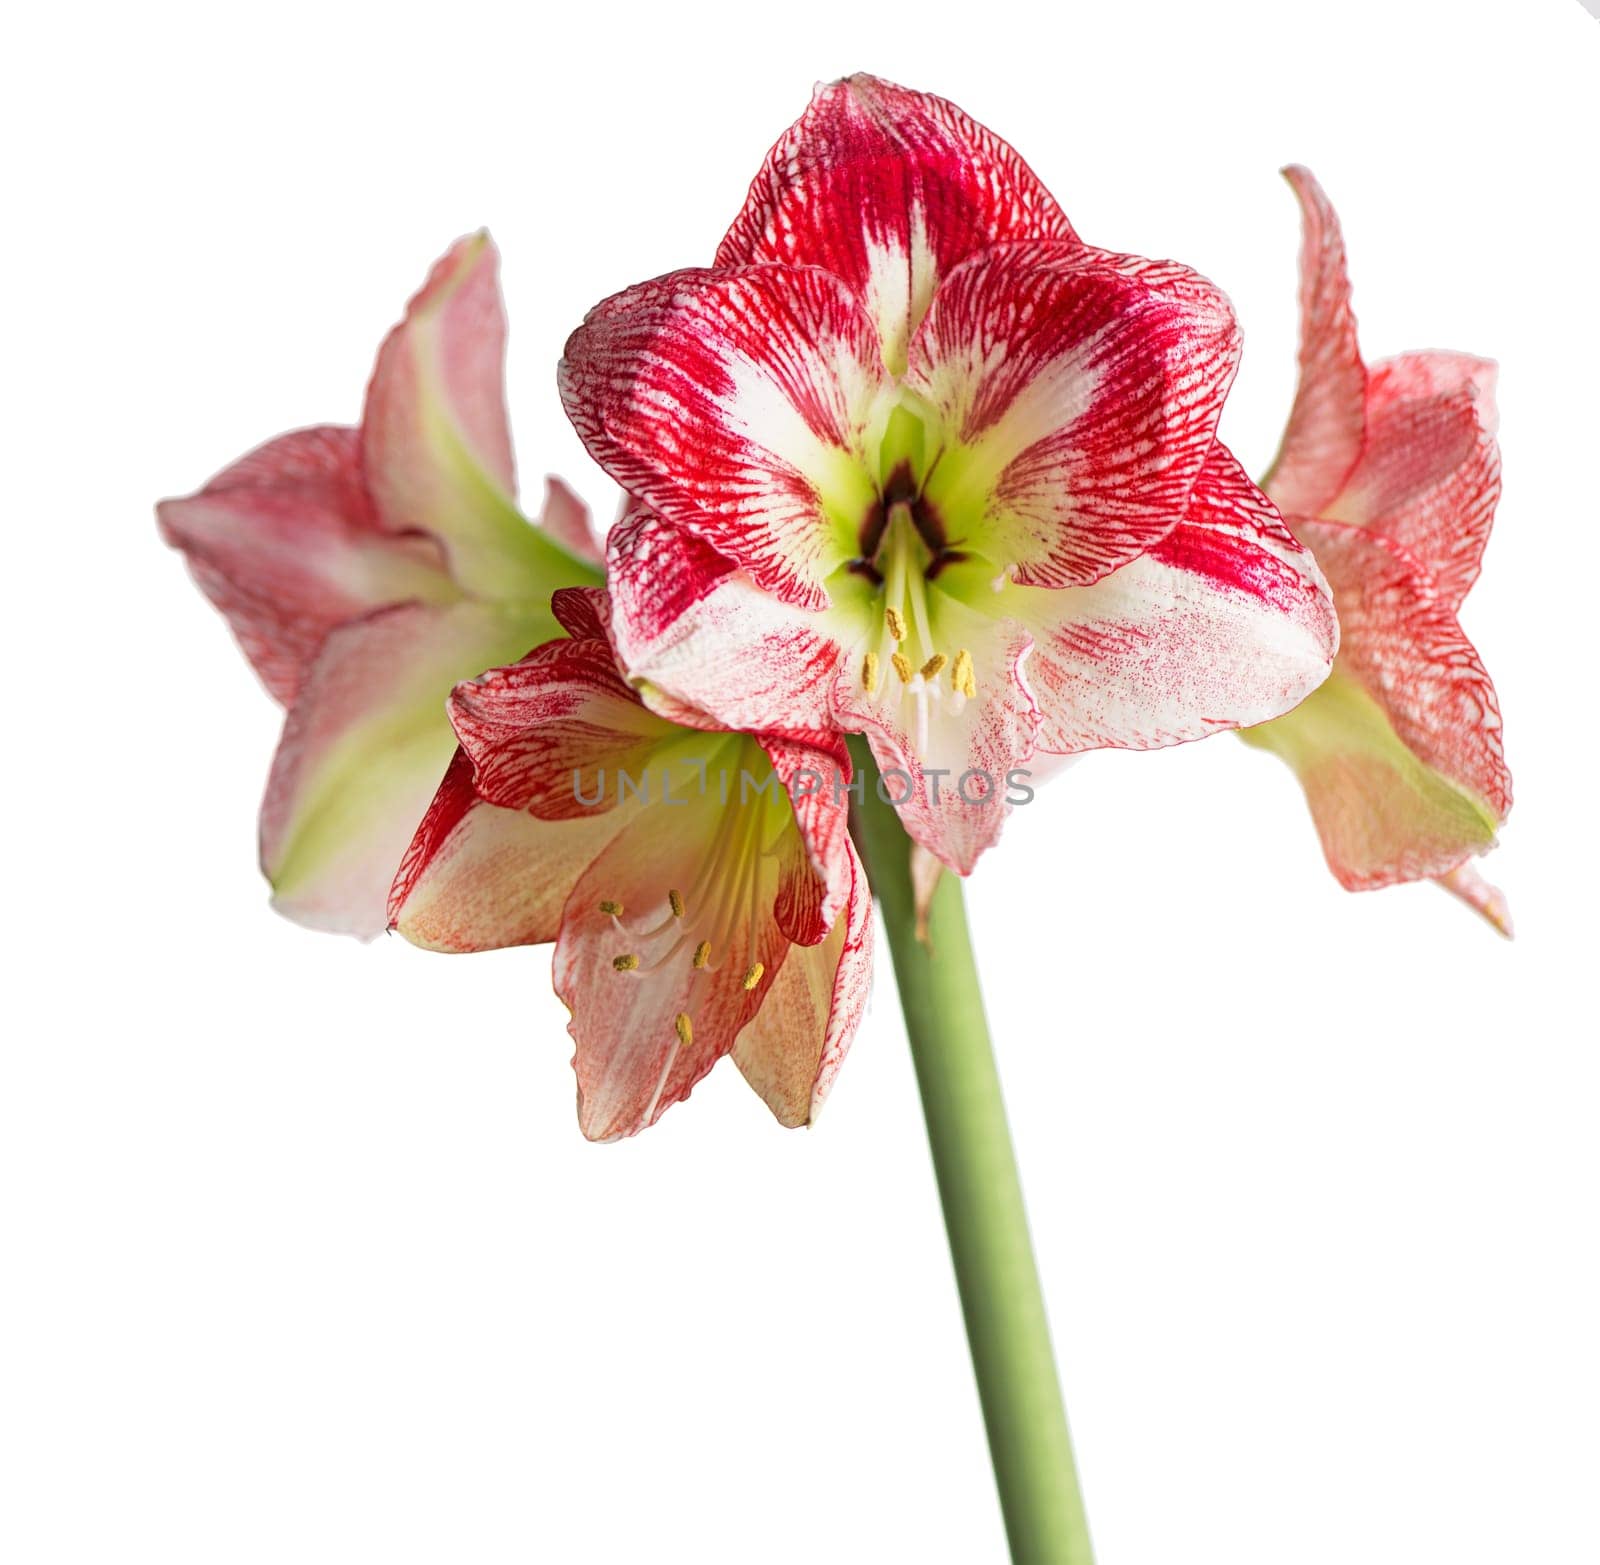 Red amaryllis flower blooming isolated with clipping path on white background,Amaryllis,Hippeastrums flowers by aprilphoto